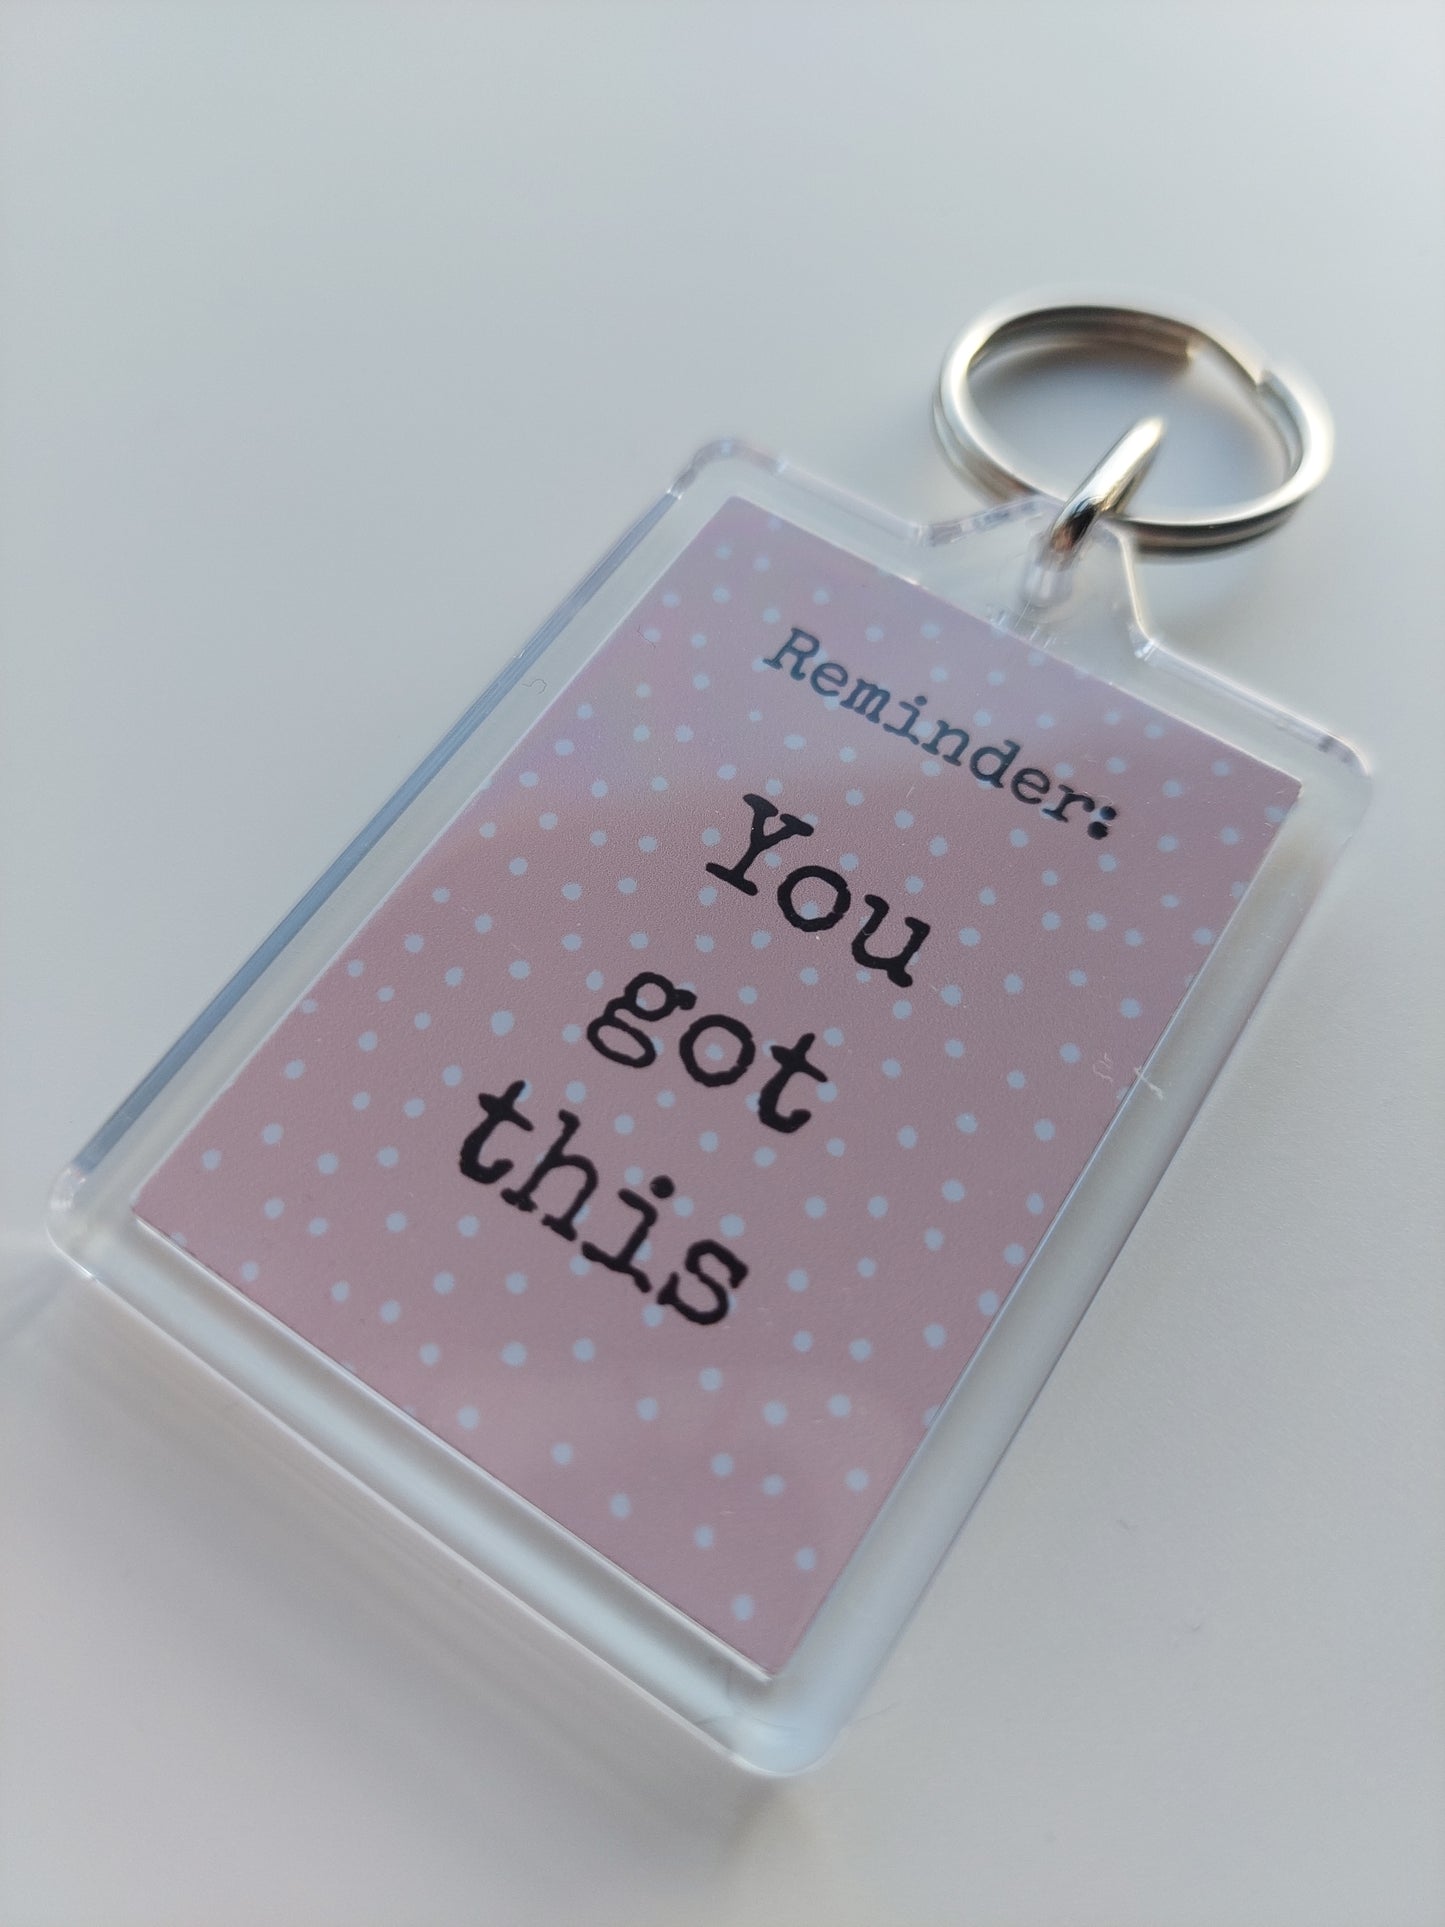 Keyring Gift | You Got This | Positive Quote Keyring | Positive Reminder Gift